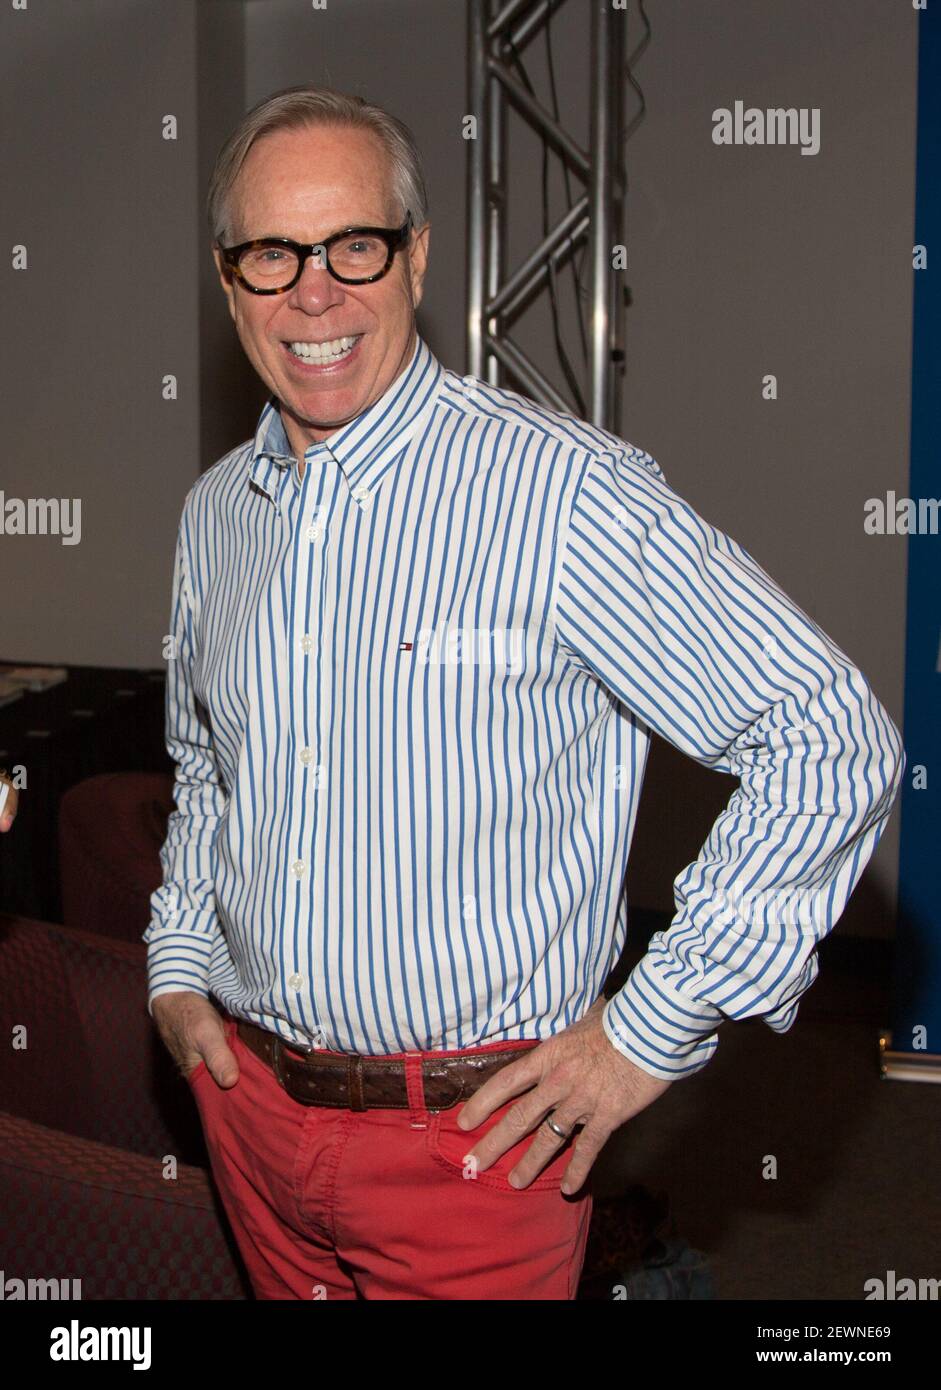 Tommy Hilfiger is seen during Tommy Hilfiger book presentation American  Dreamer: My Live in Fashion & Business at the Miami Book Fair on November  20, 2016 in Miami, Florida Stock Photo - Alamy